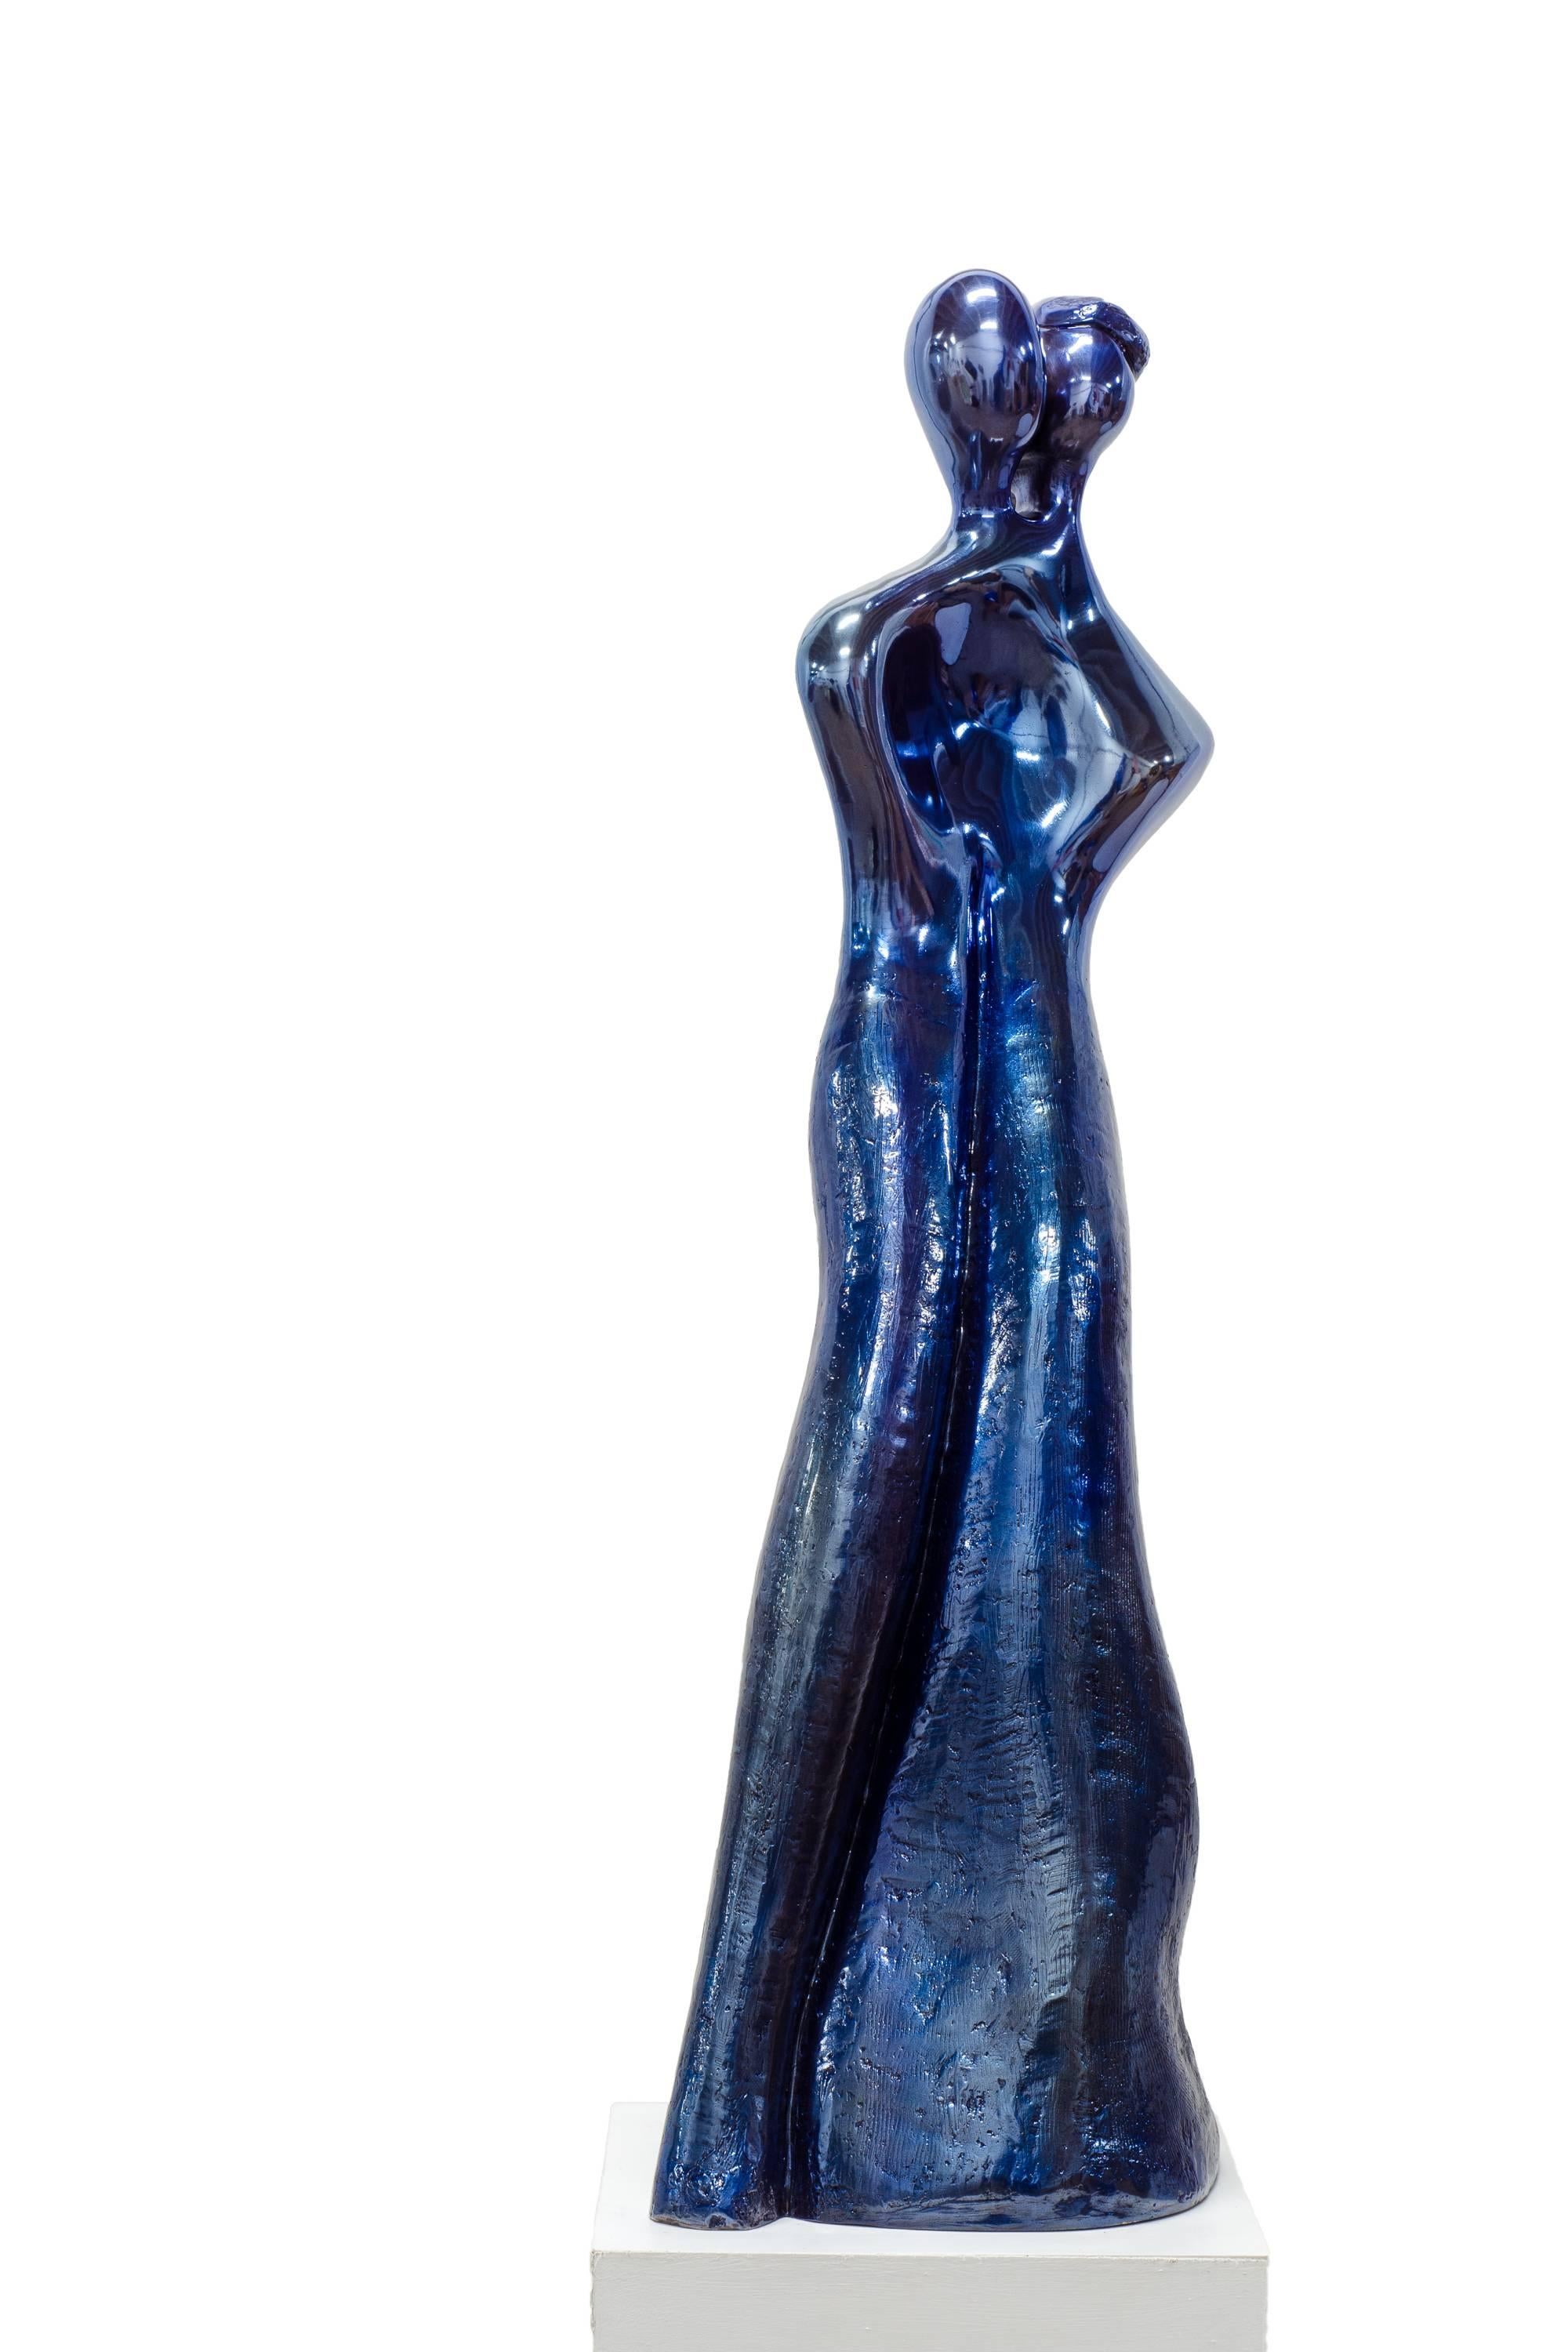 Soulmates #1 (in Blue). When In love, their souls and bodies fuse into just one. - Sculpture by Beatriz Gerenstein